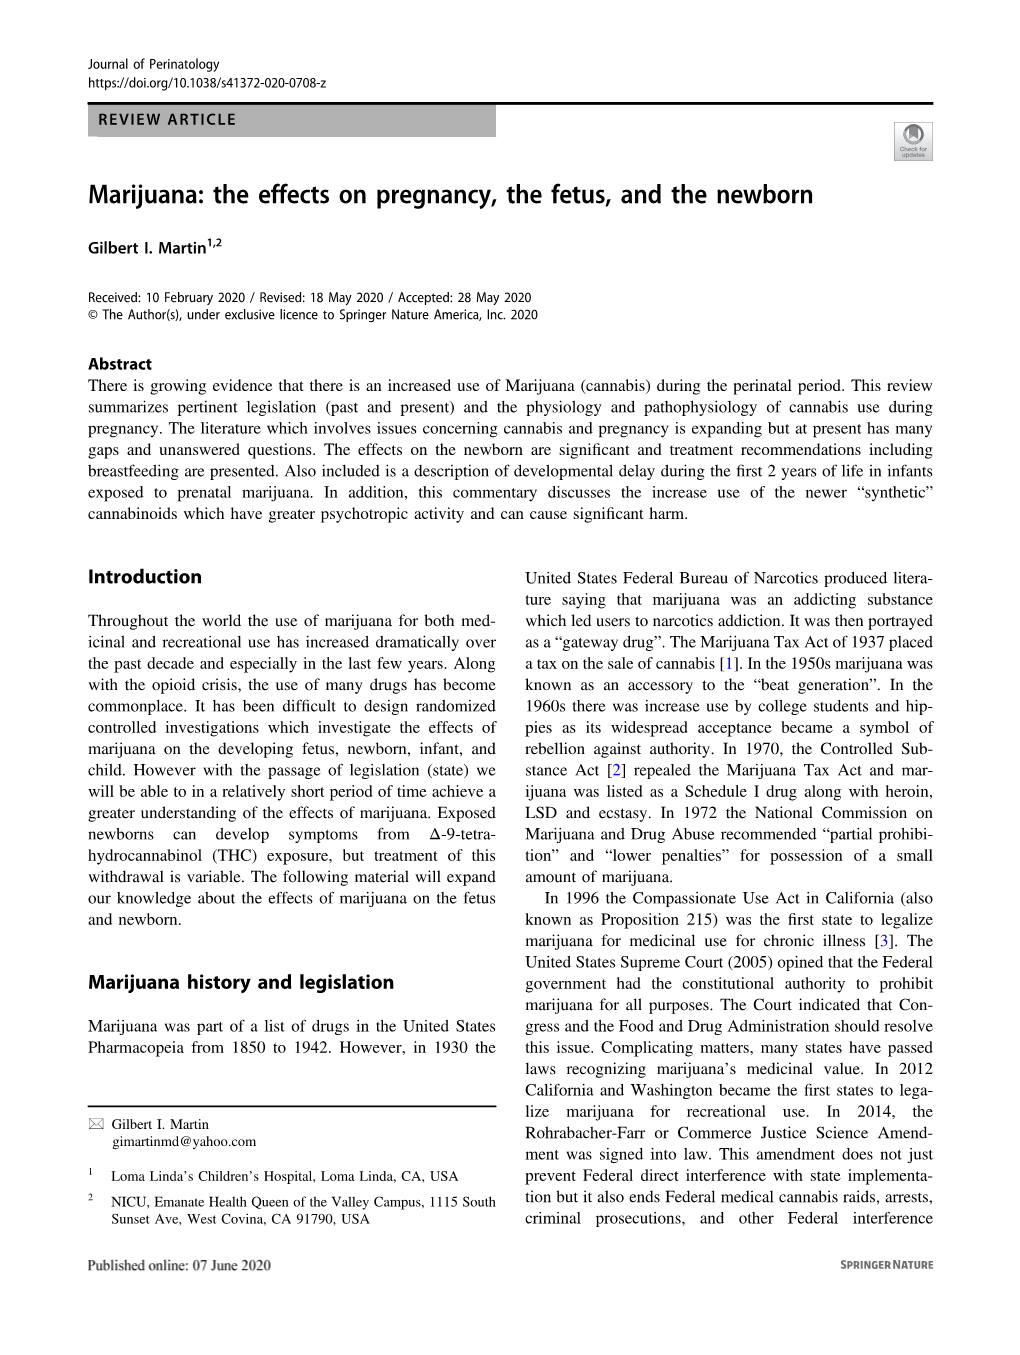 Marijuana: the Effects on Pregnancy, the Fetus, and the Newborn